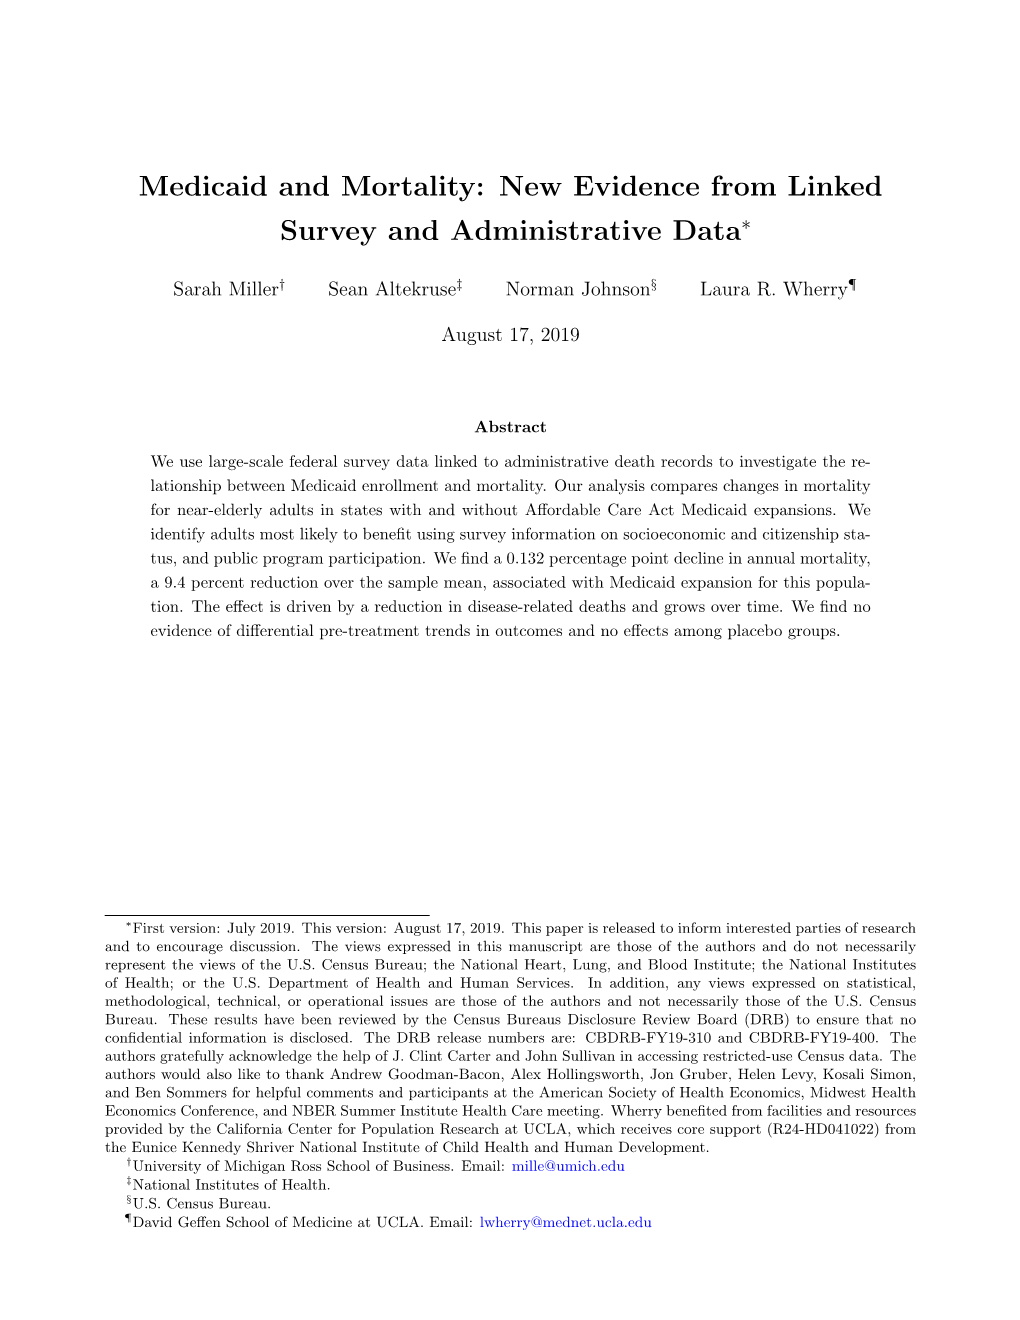 Medicaid and Mortality: New Evidence from Linked Survey and Administrative Data∗